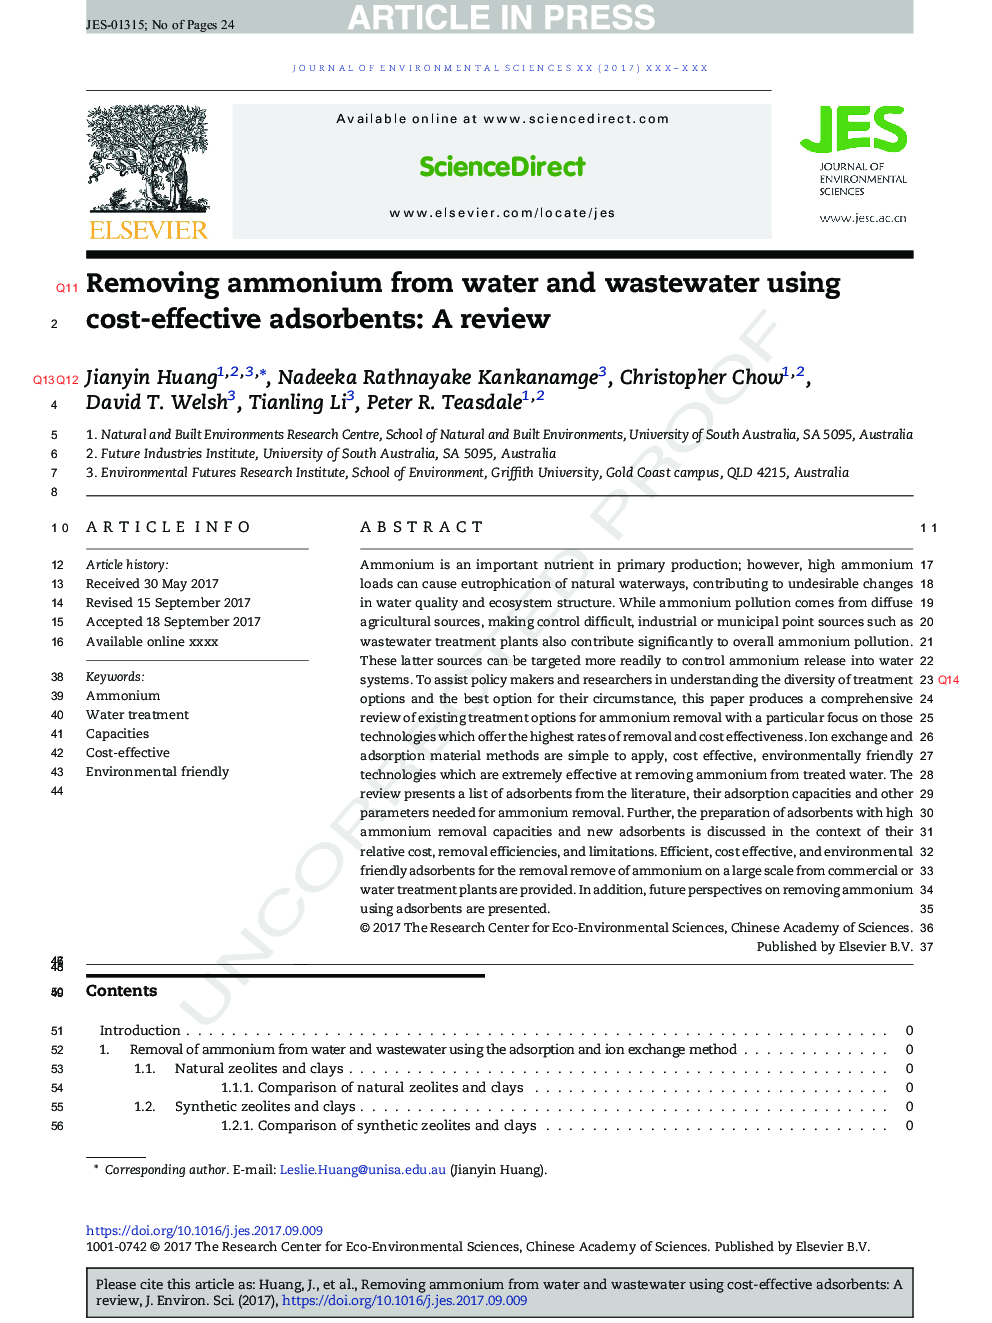 Removing ammonium from water and wastewater using cost-effective adsorbents: A review